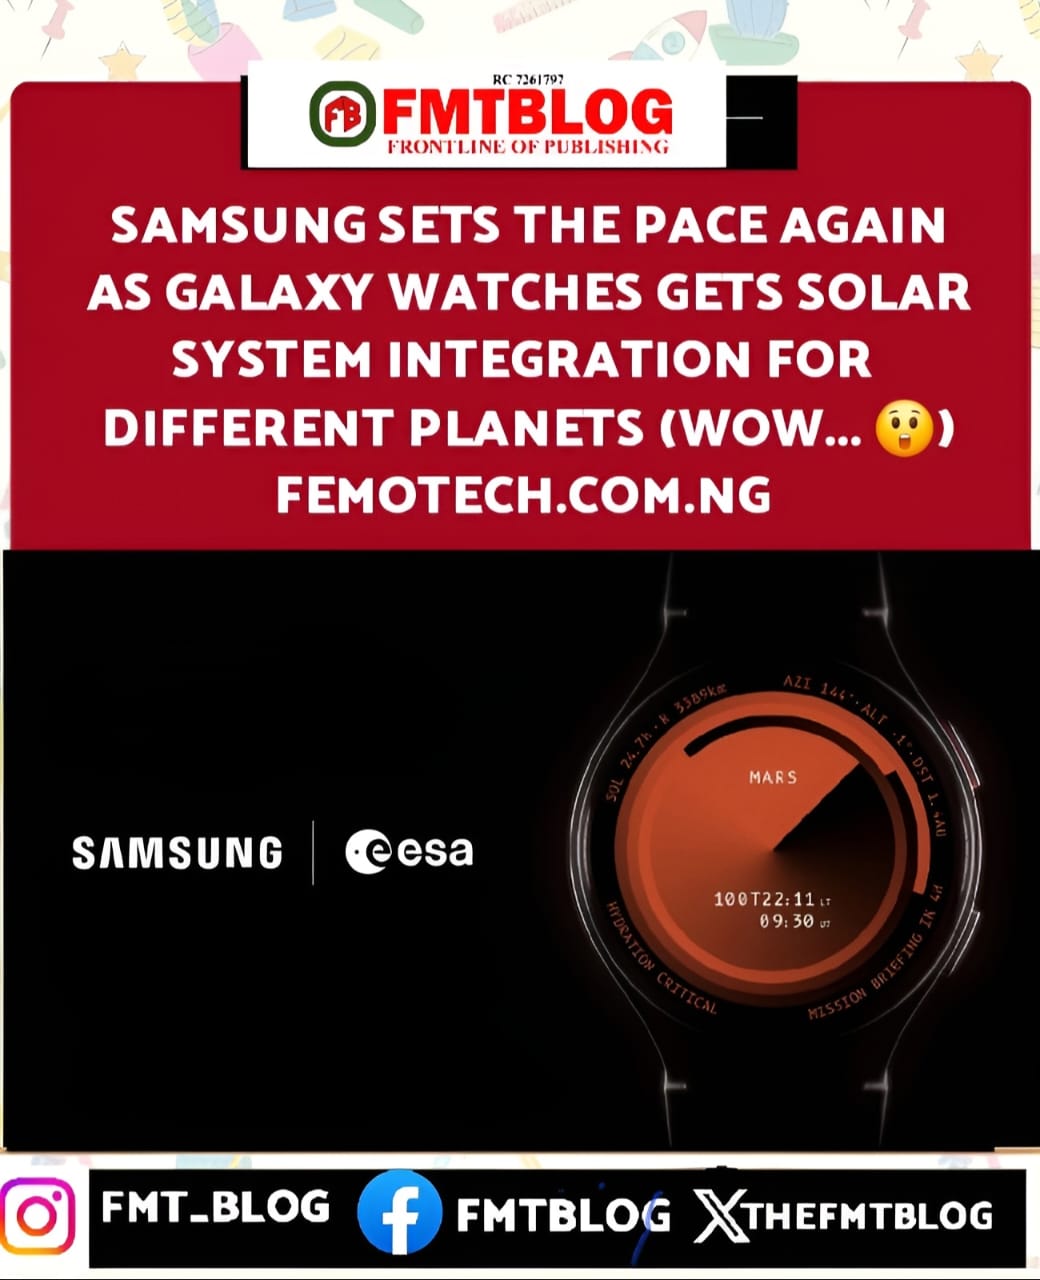 Samsung Sets The Pace Again As Galaxy Watches Gets Solar System Integration For Different Planets (WOW….😮)